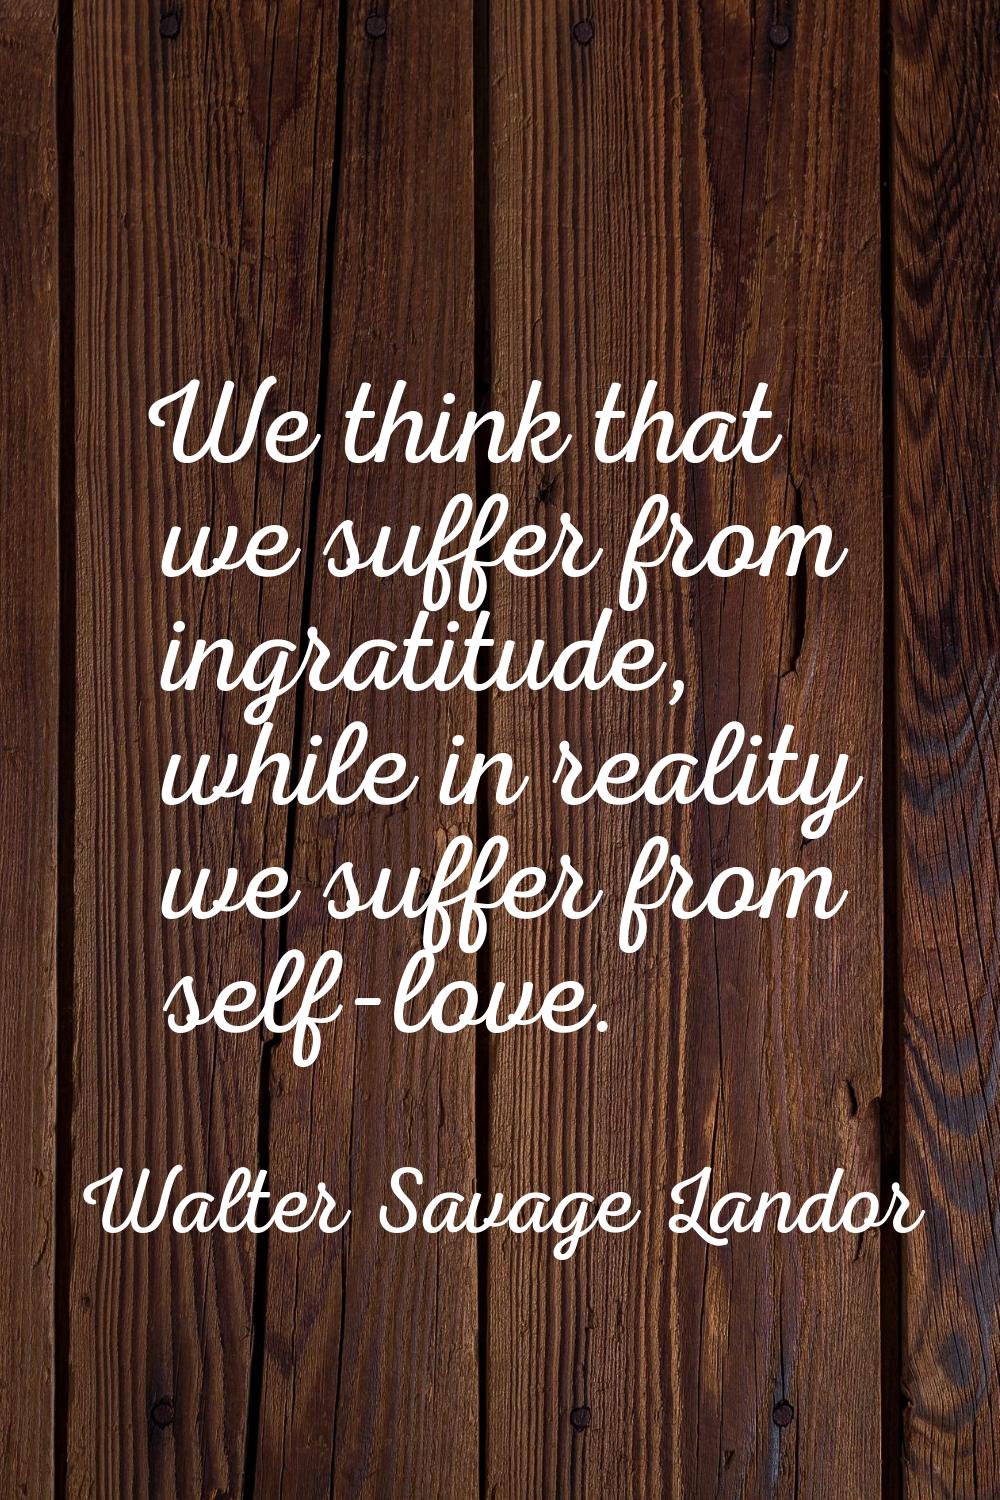 We think that we suffer from ingratitude, while in reality we suffer from self-love.